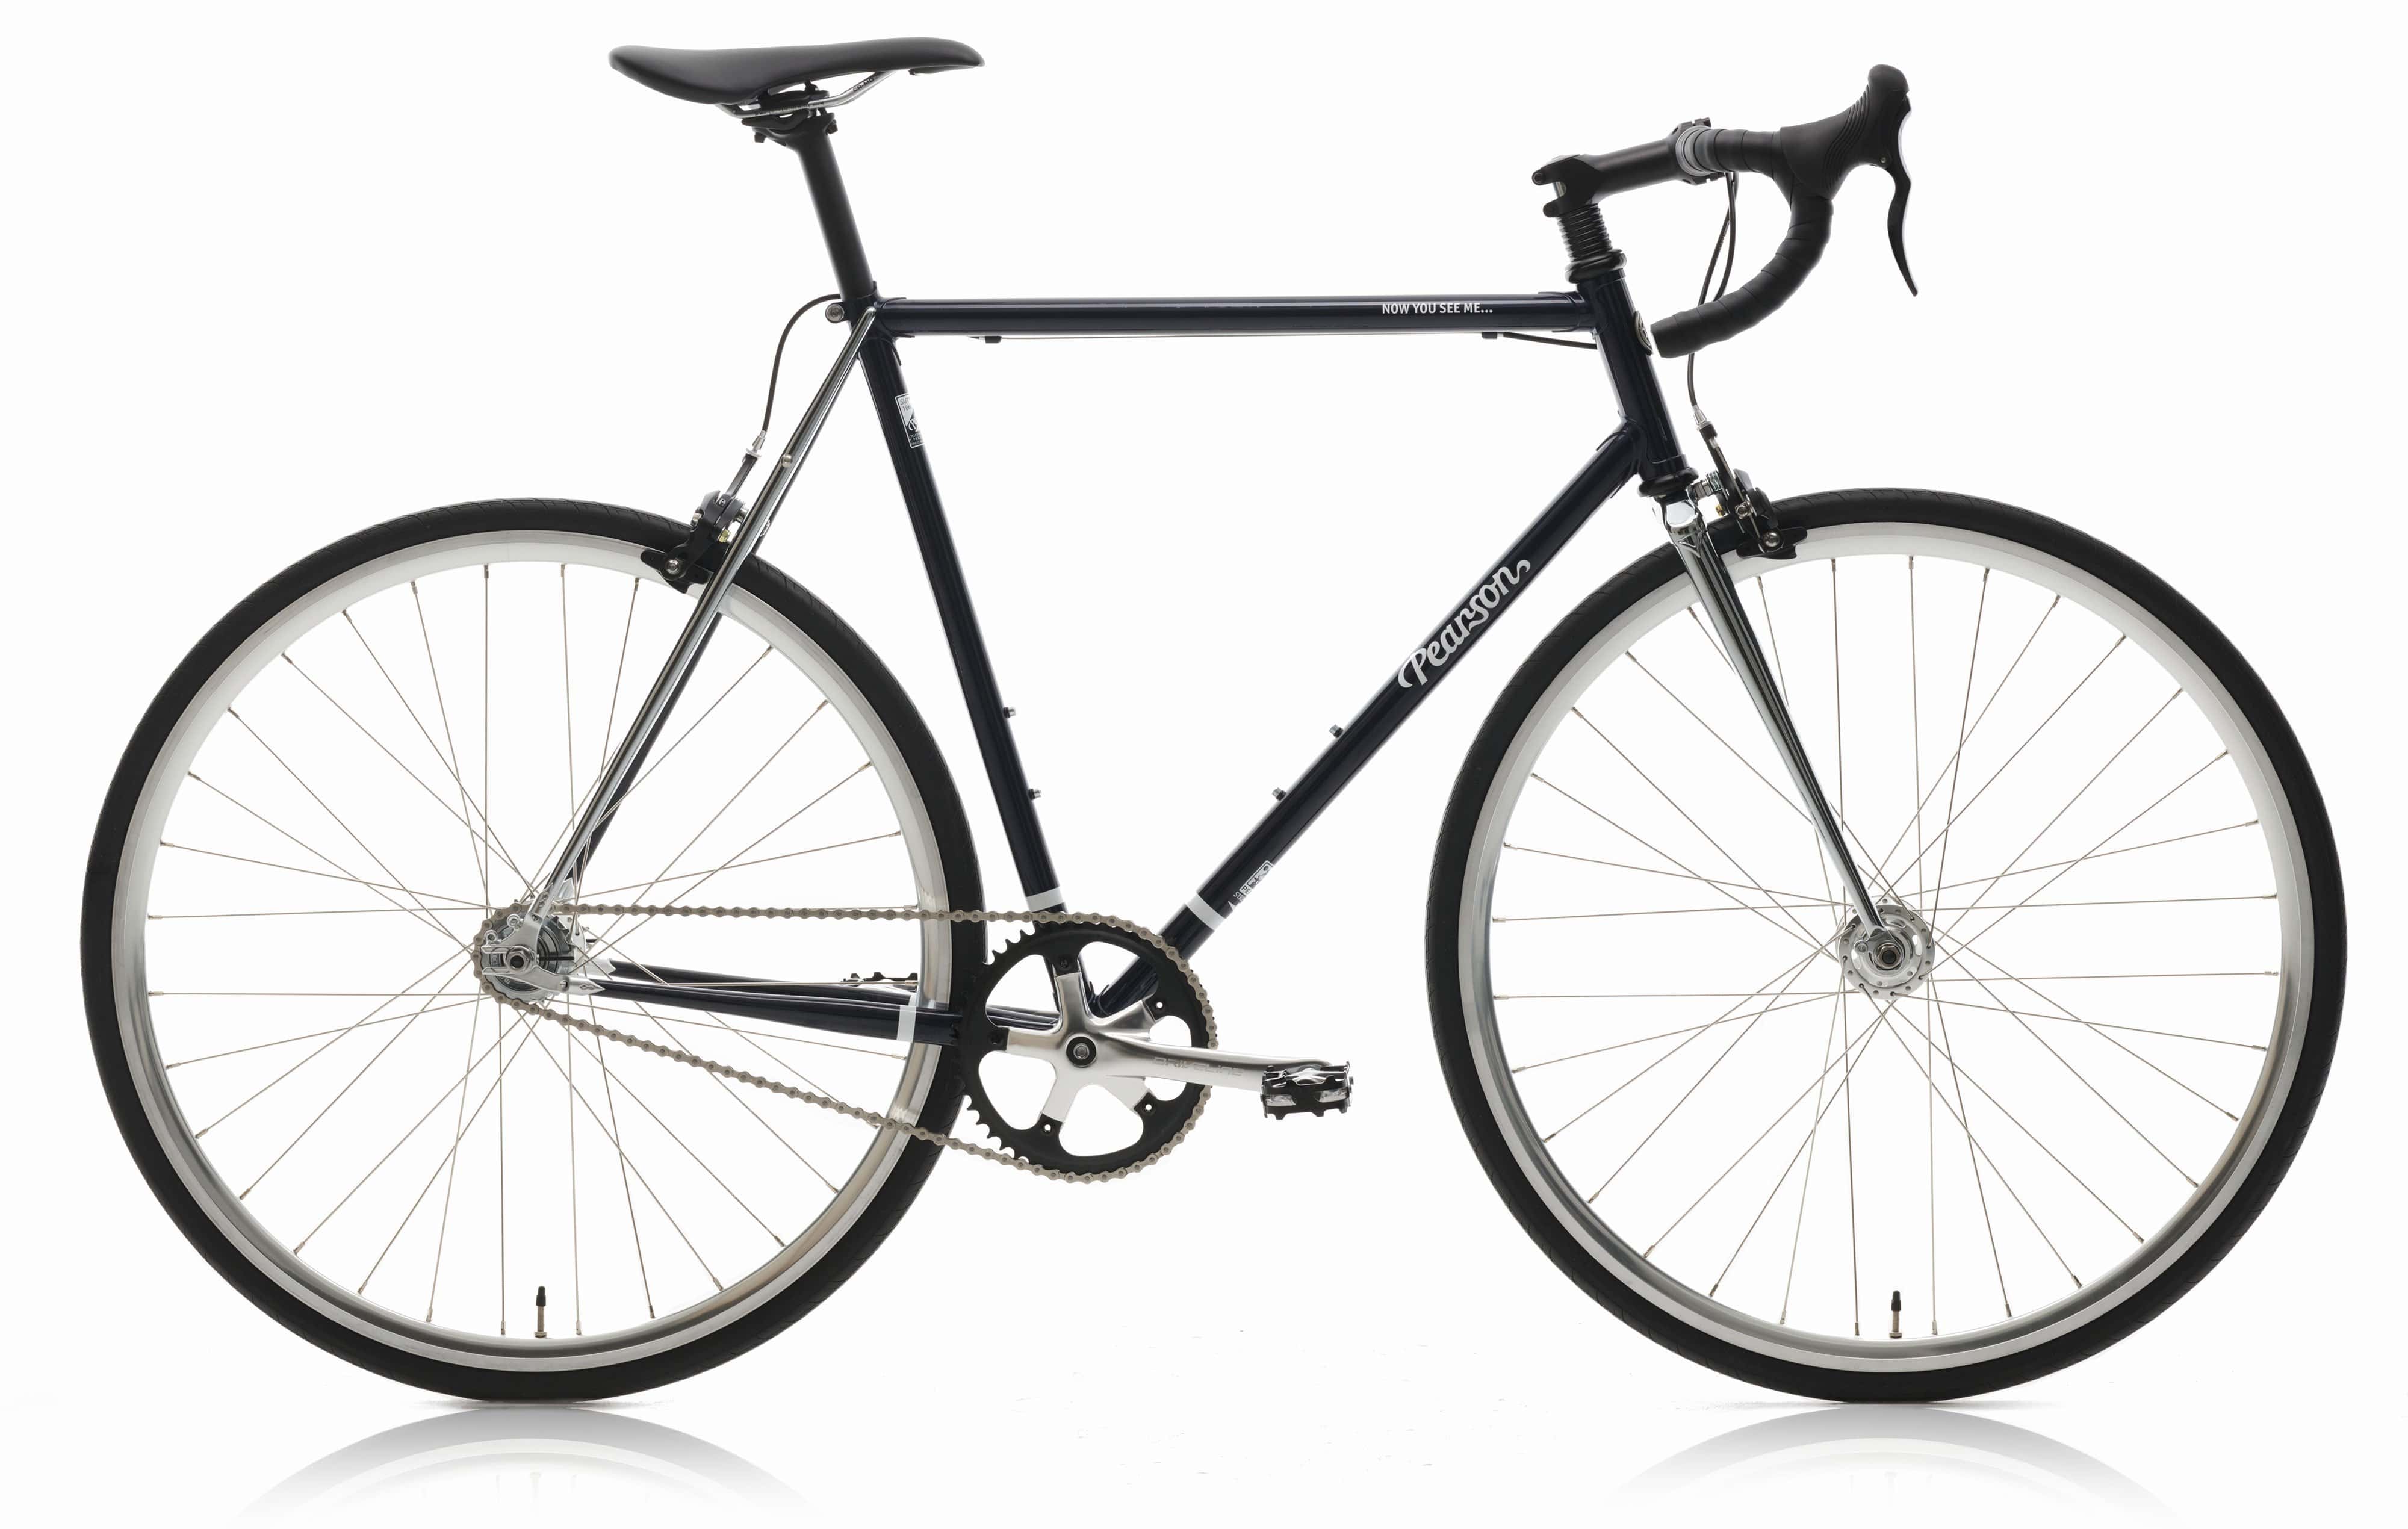 Pcs  Now You See Me - Steel Single Speed Bike  Continental Gator Hardshell 28mm / With Mudguards / X-large